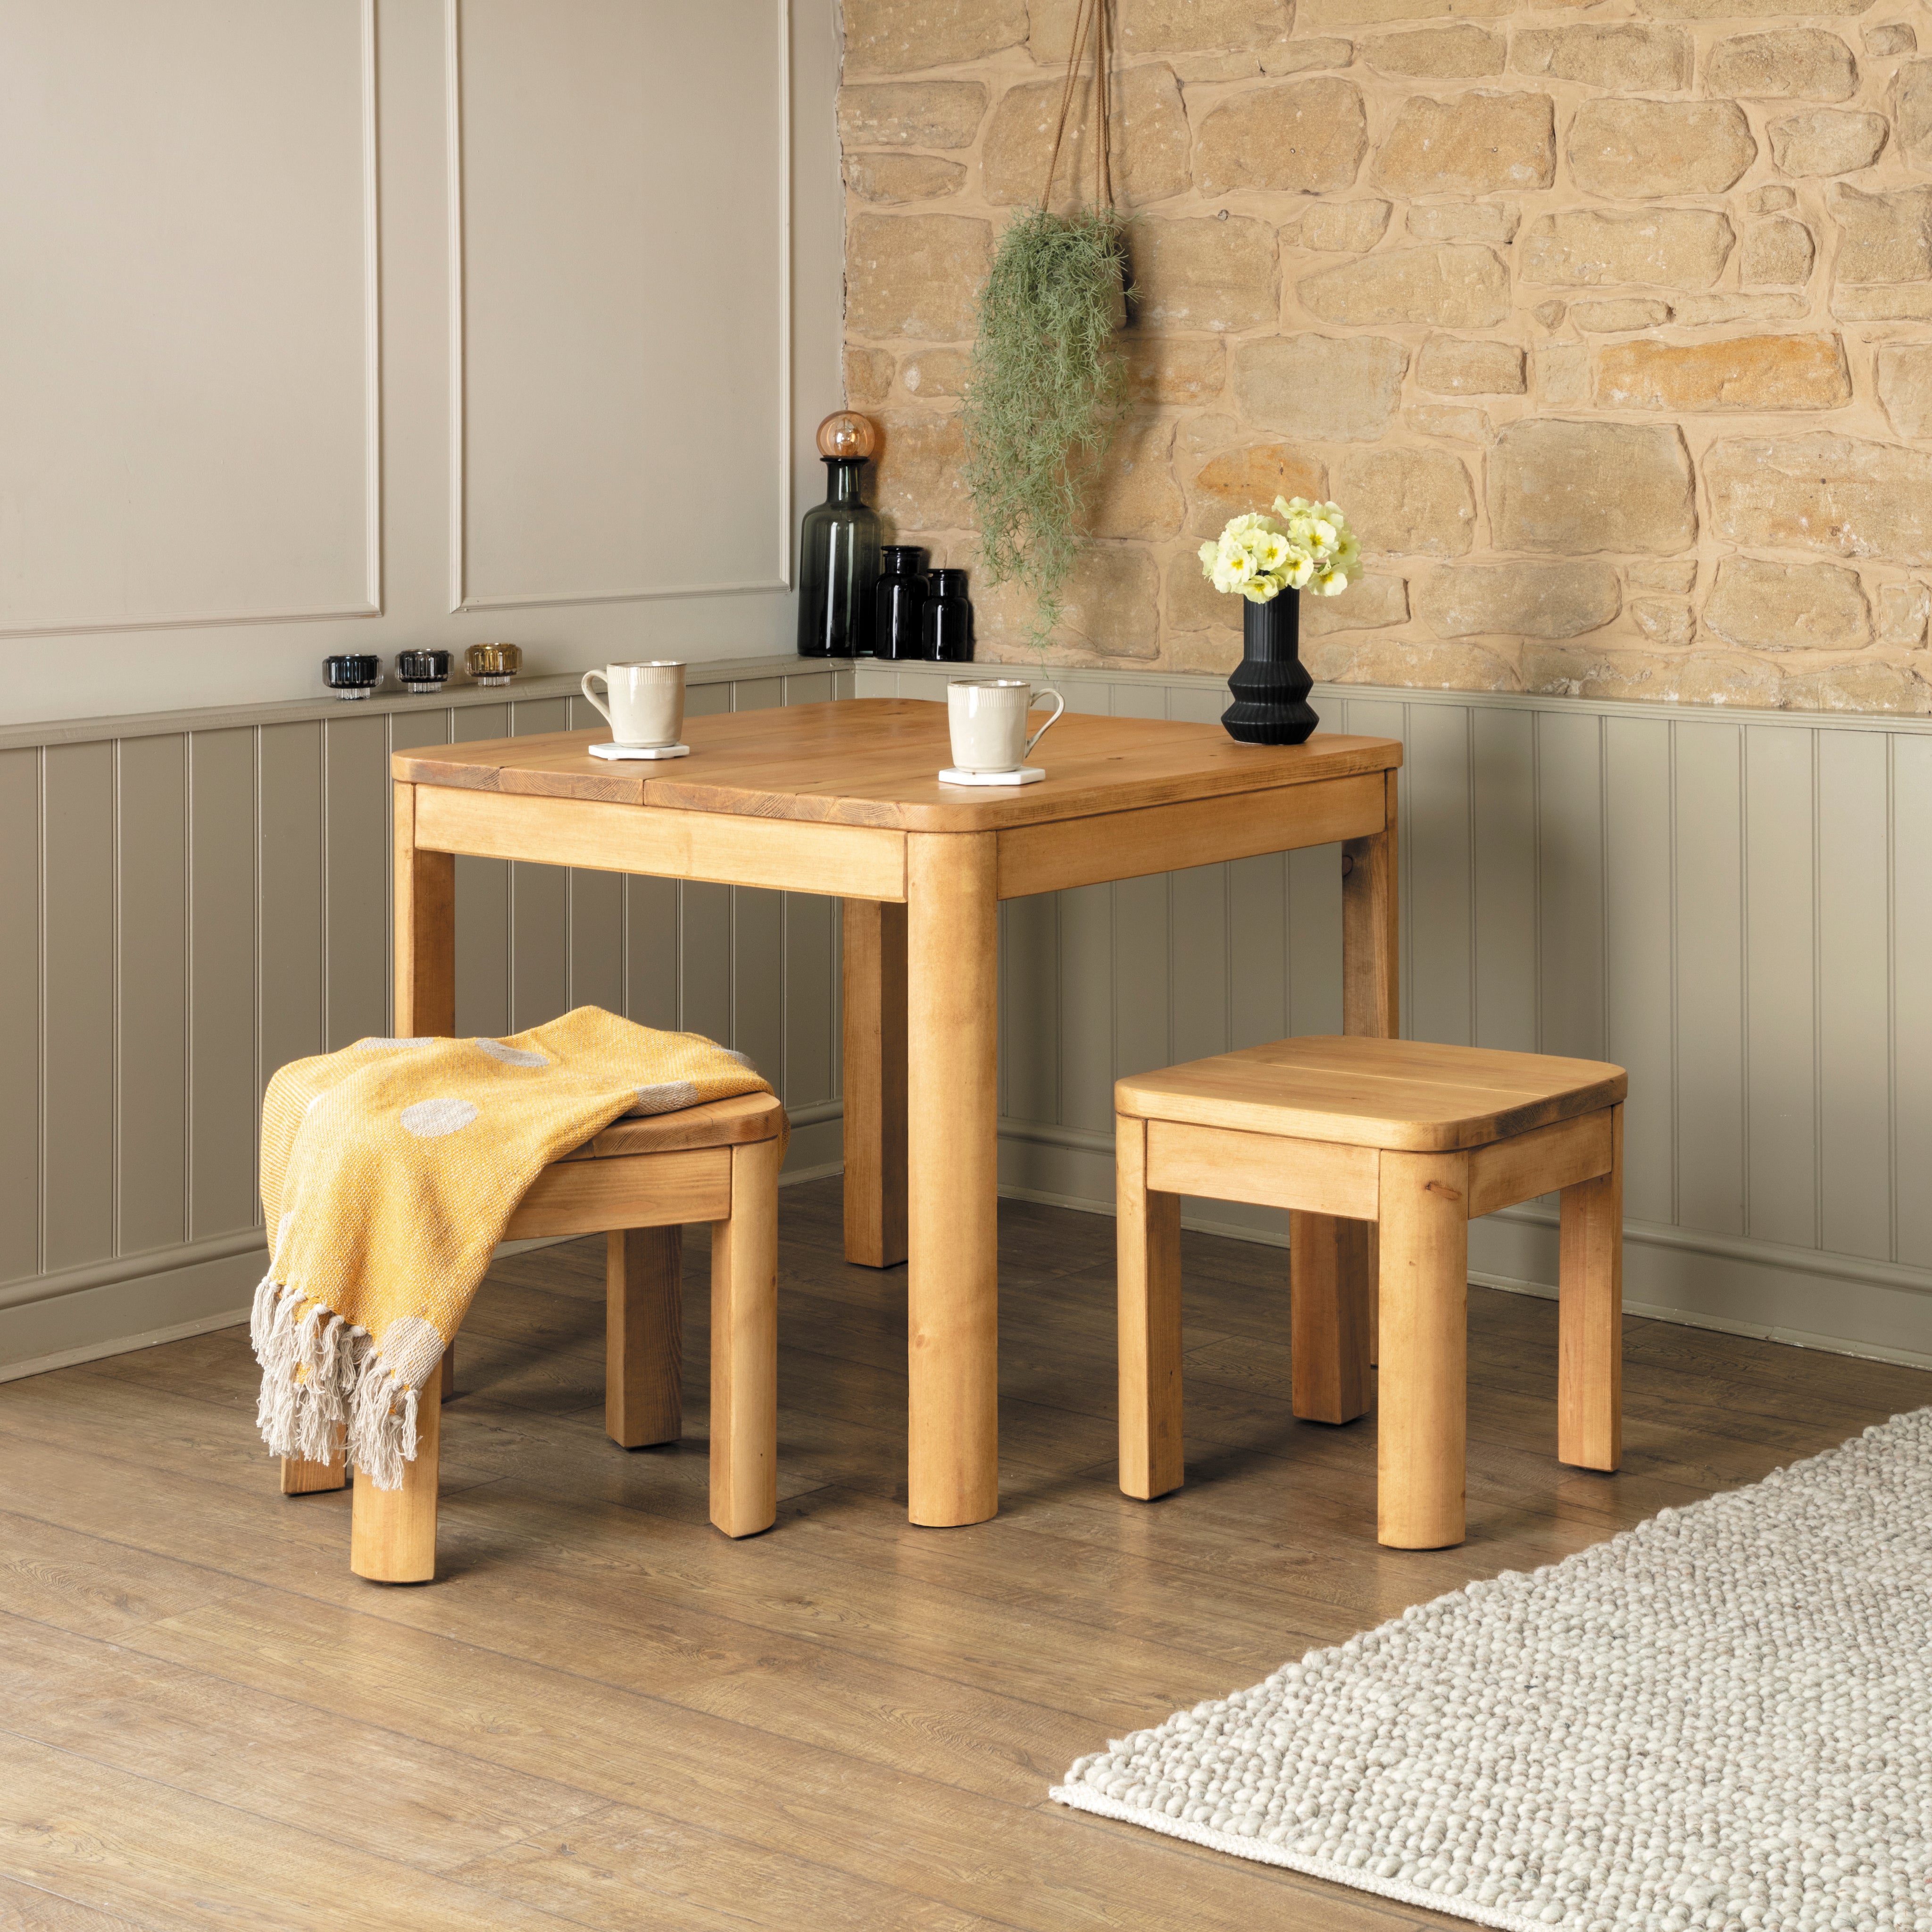 Gosforth Square Dining Table - Kitchen & Dining Room Tables